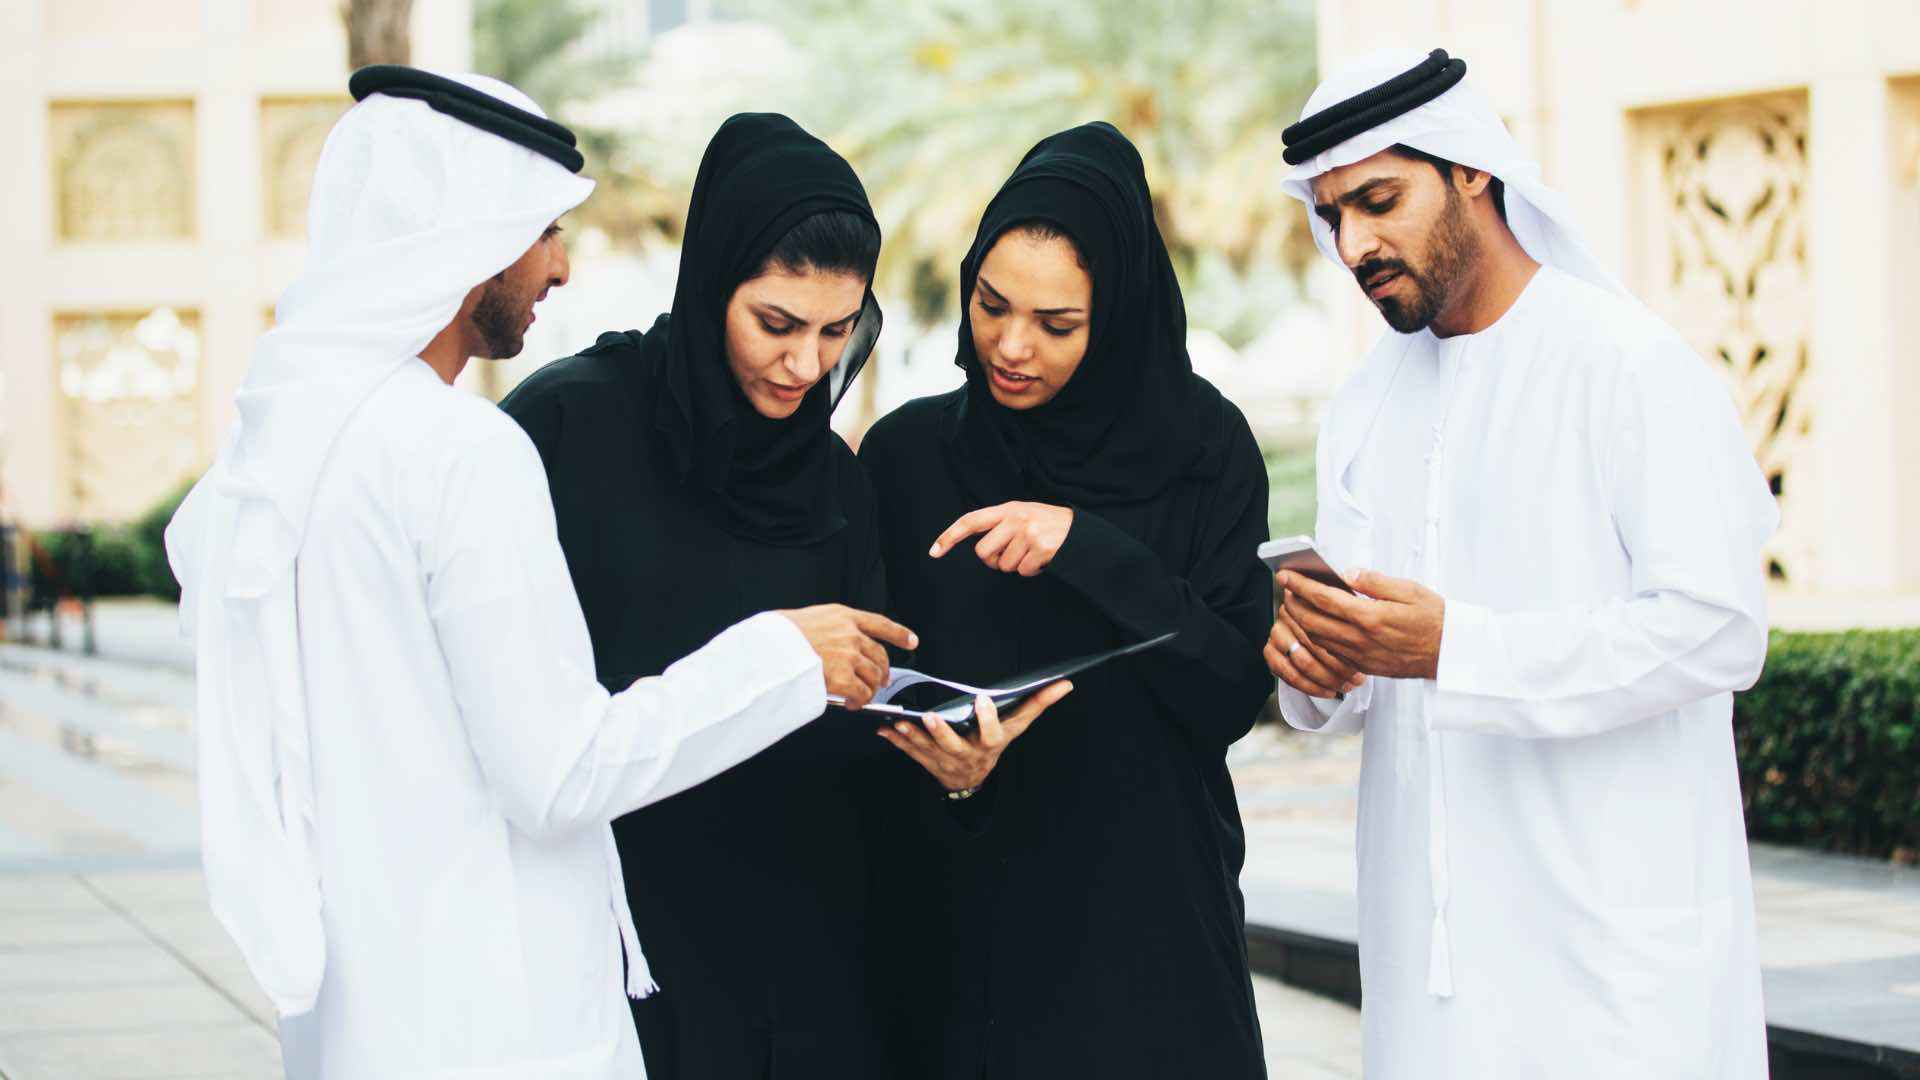 Salary packages, job benefit, job security, and career development are the top 3 influential factors for Emirati job seekers considering a new role. 